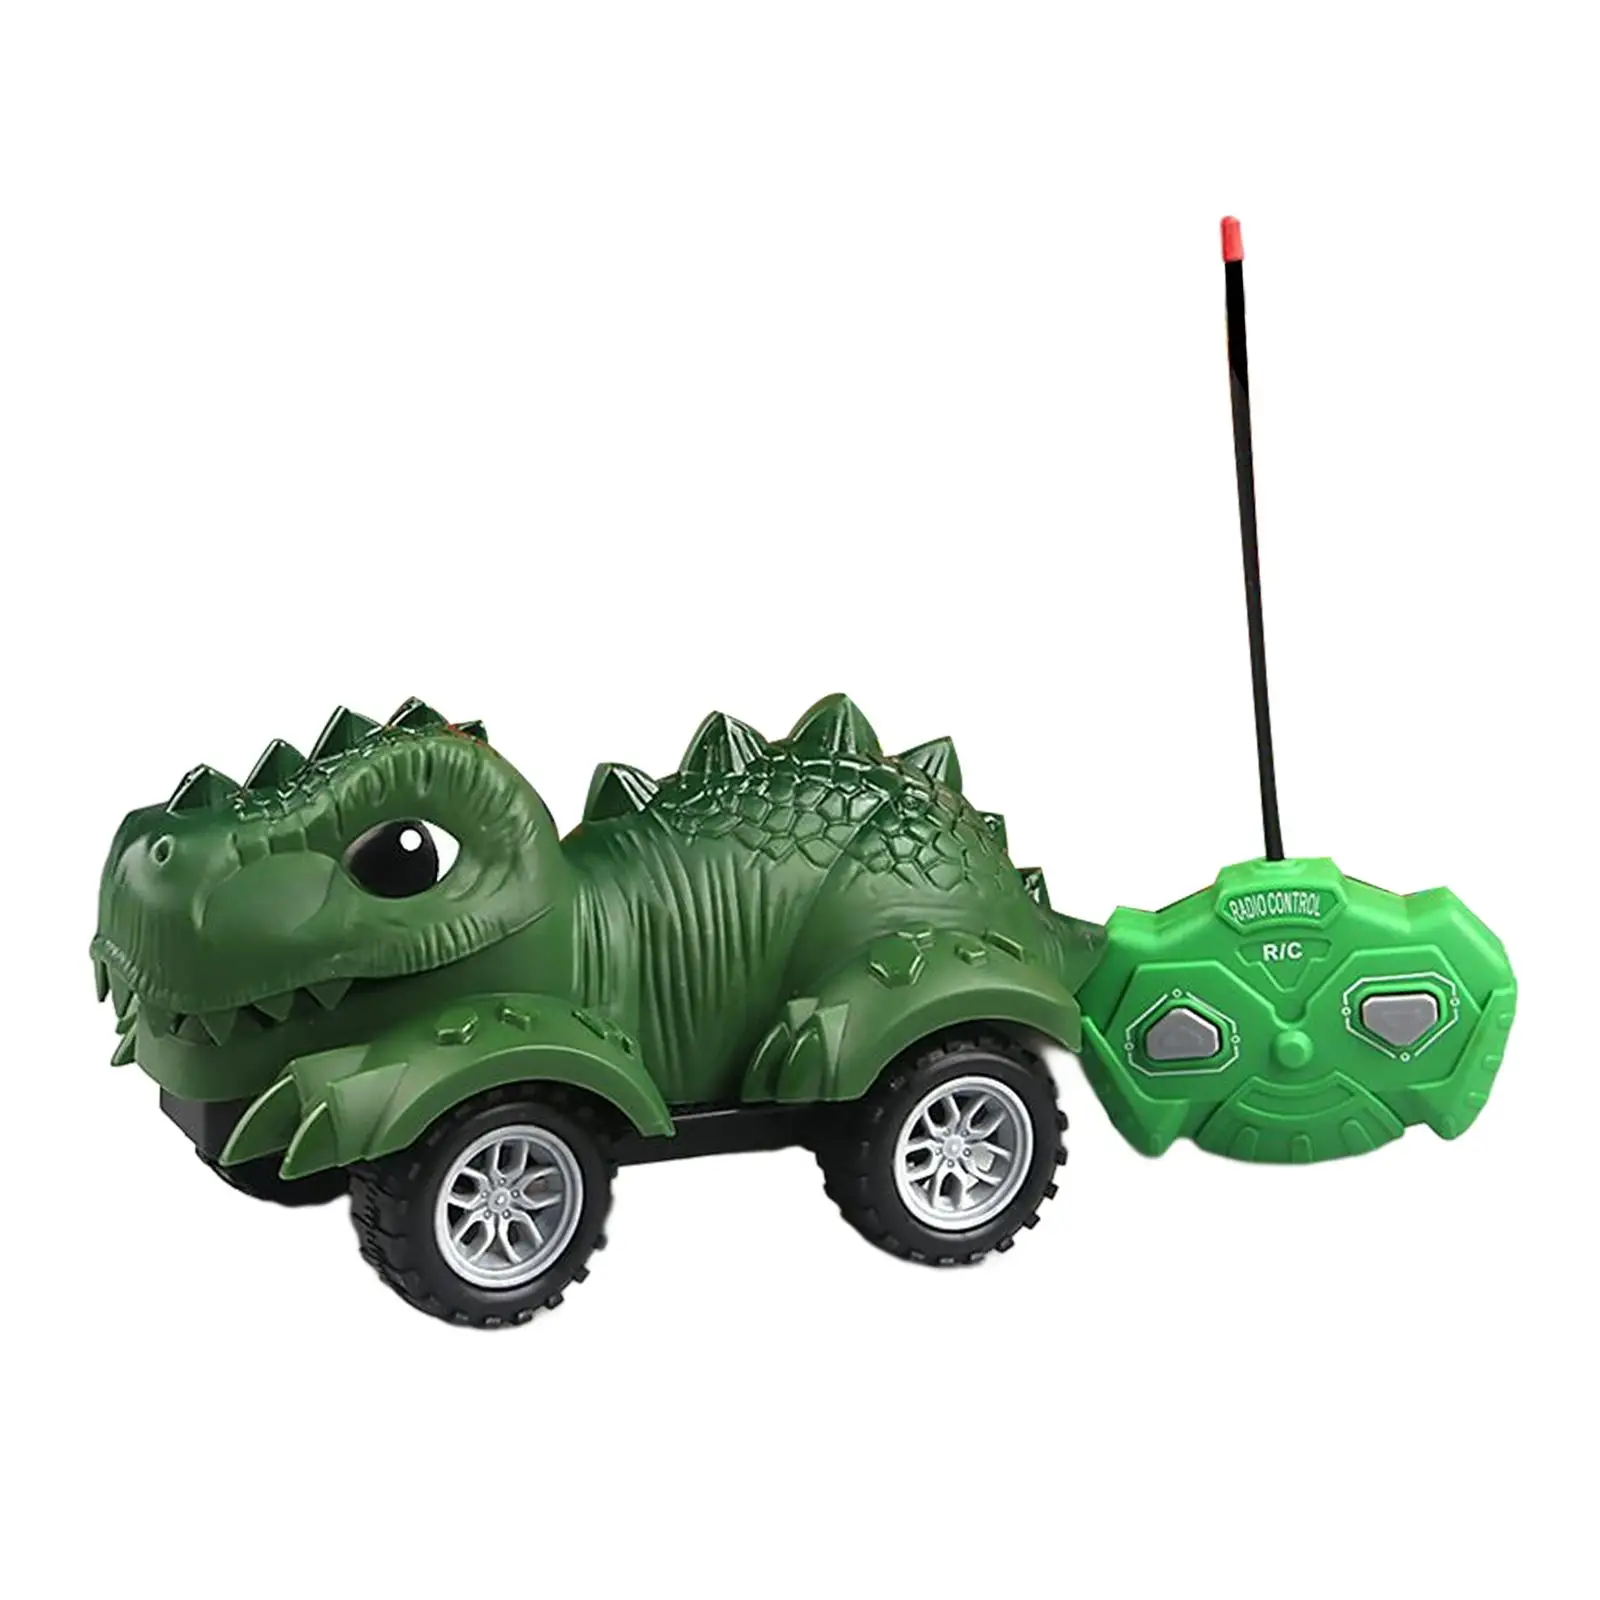 Remote Control Dinosaur Car Toys DIY Disassembly Learning Educational toys Toy Vehicle for Party Favors Boys 3-5 Children